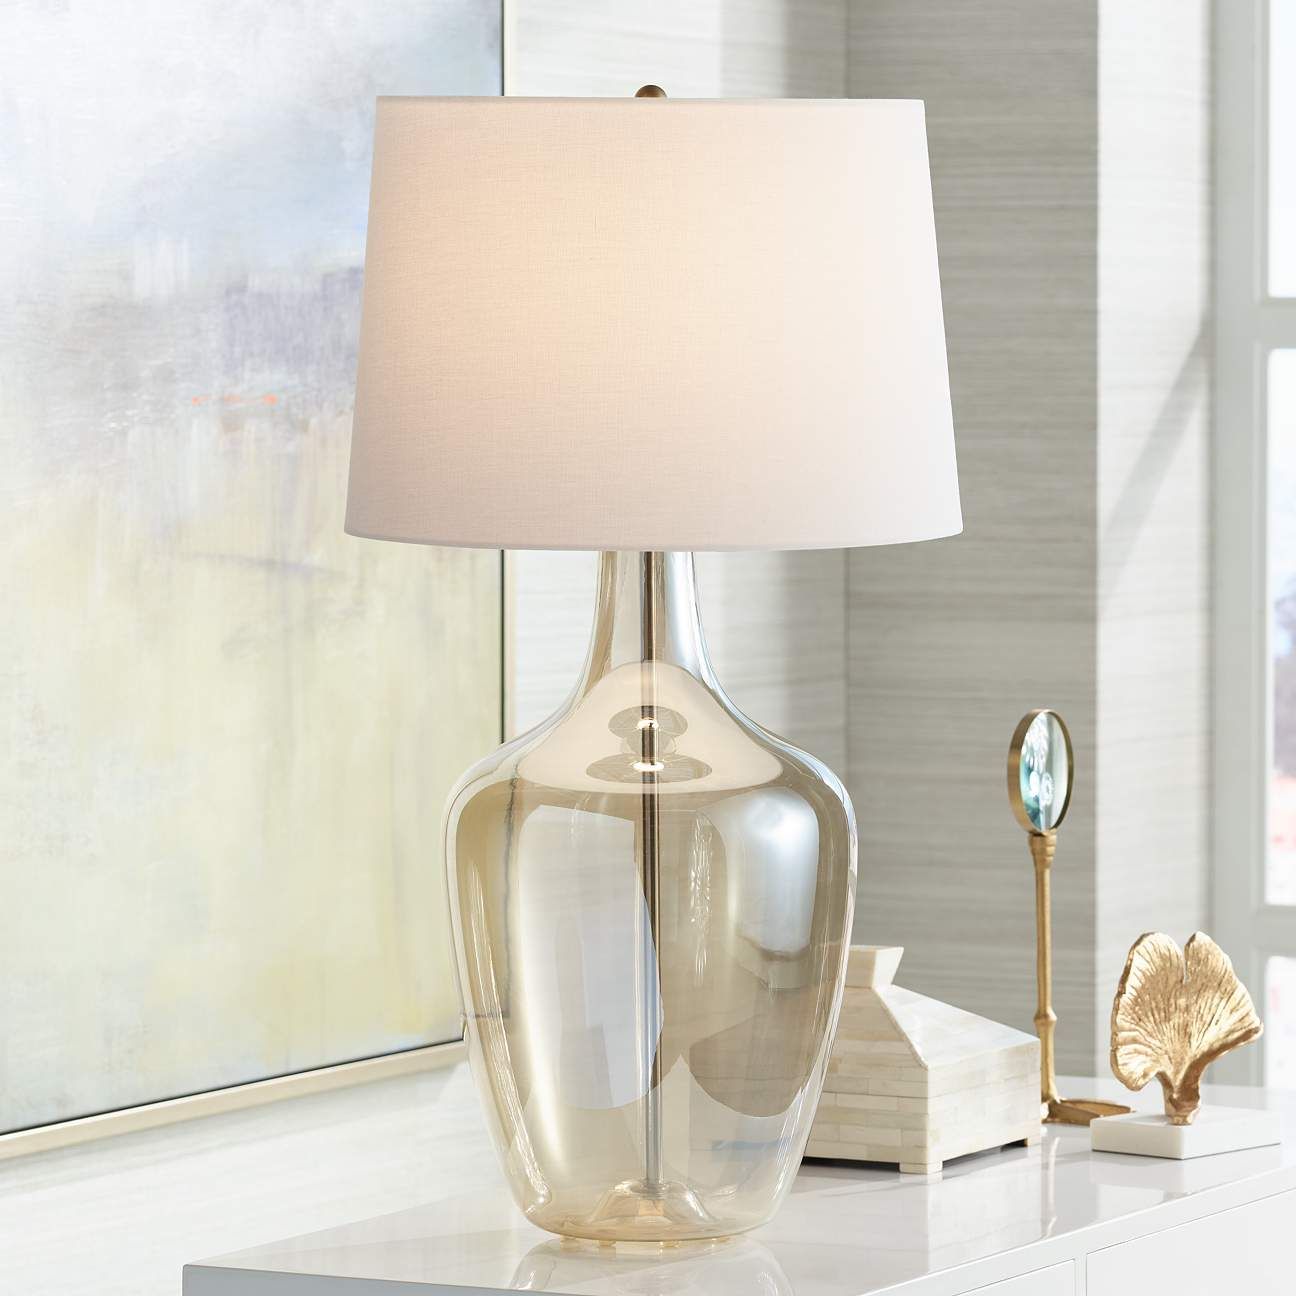 Ania Champagne Glass Jar Table Lamp | Lamps Plus